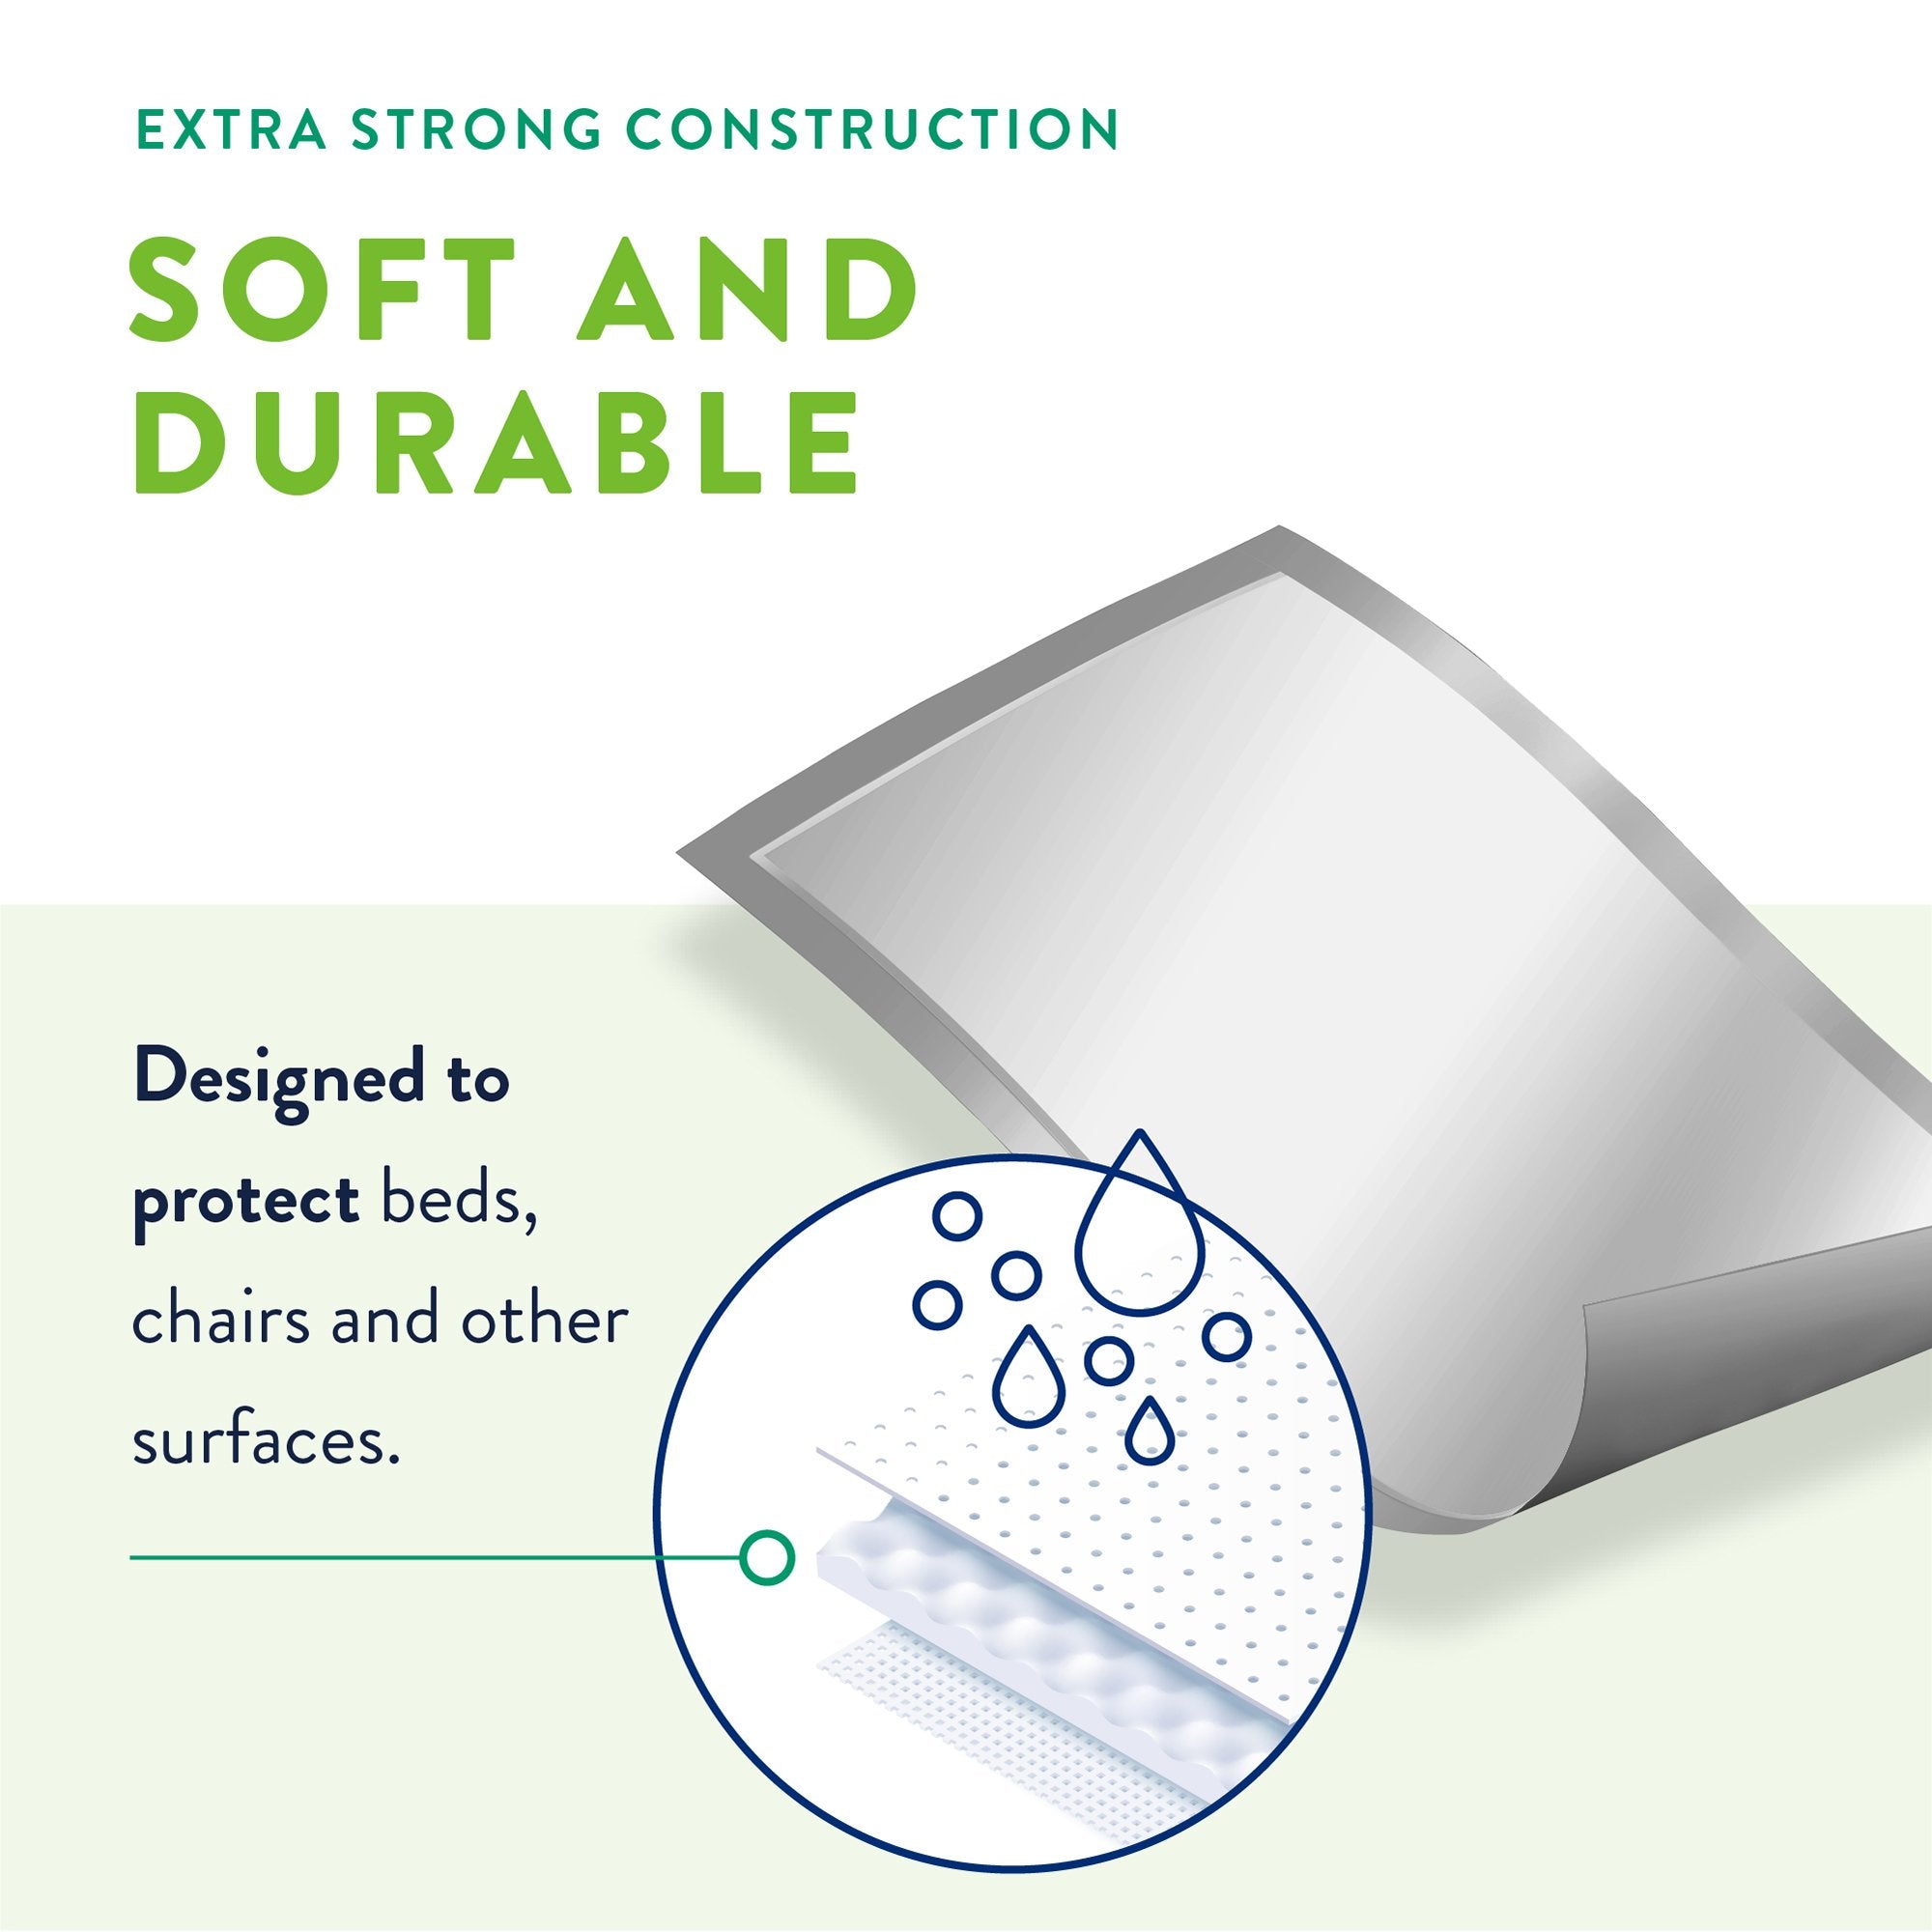 Disposable Underpad Prevail® Total Care™ 23 X 36 Inch Fluff Light Absorbency